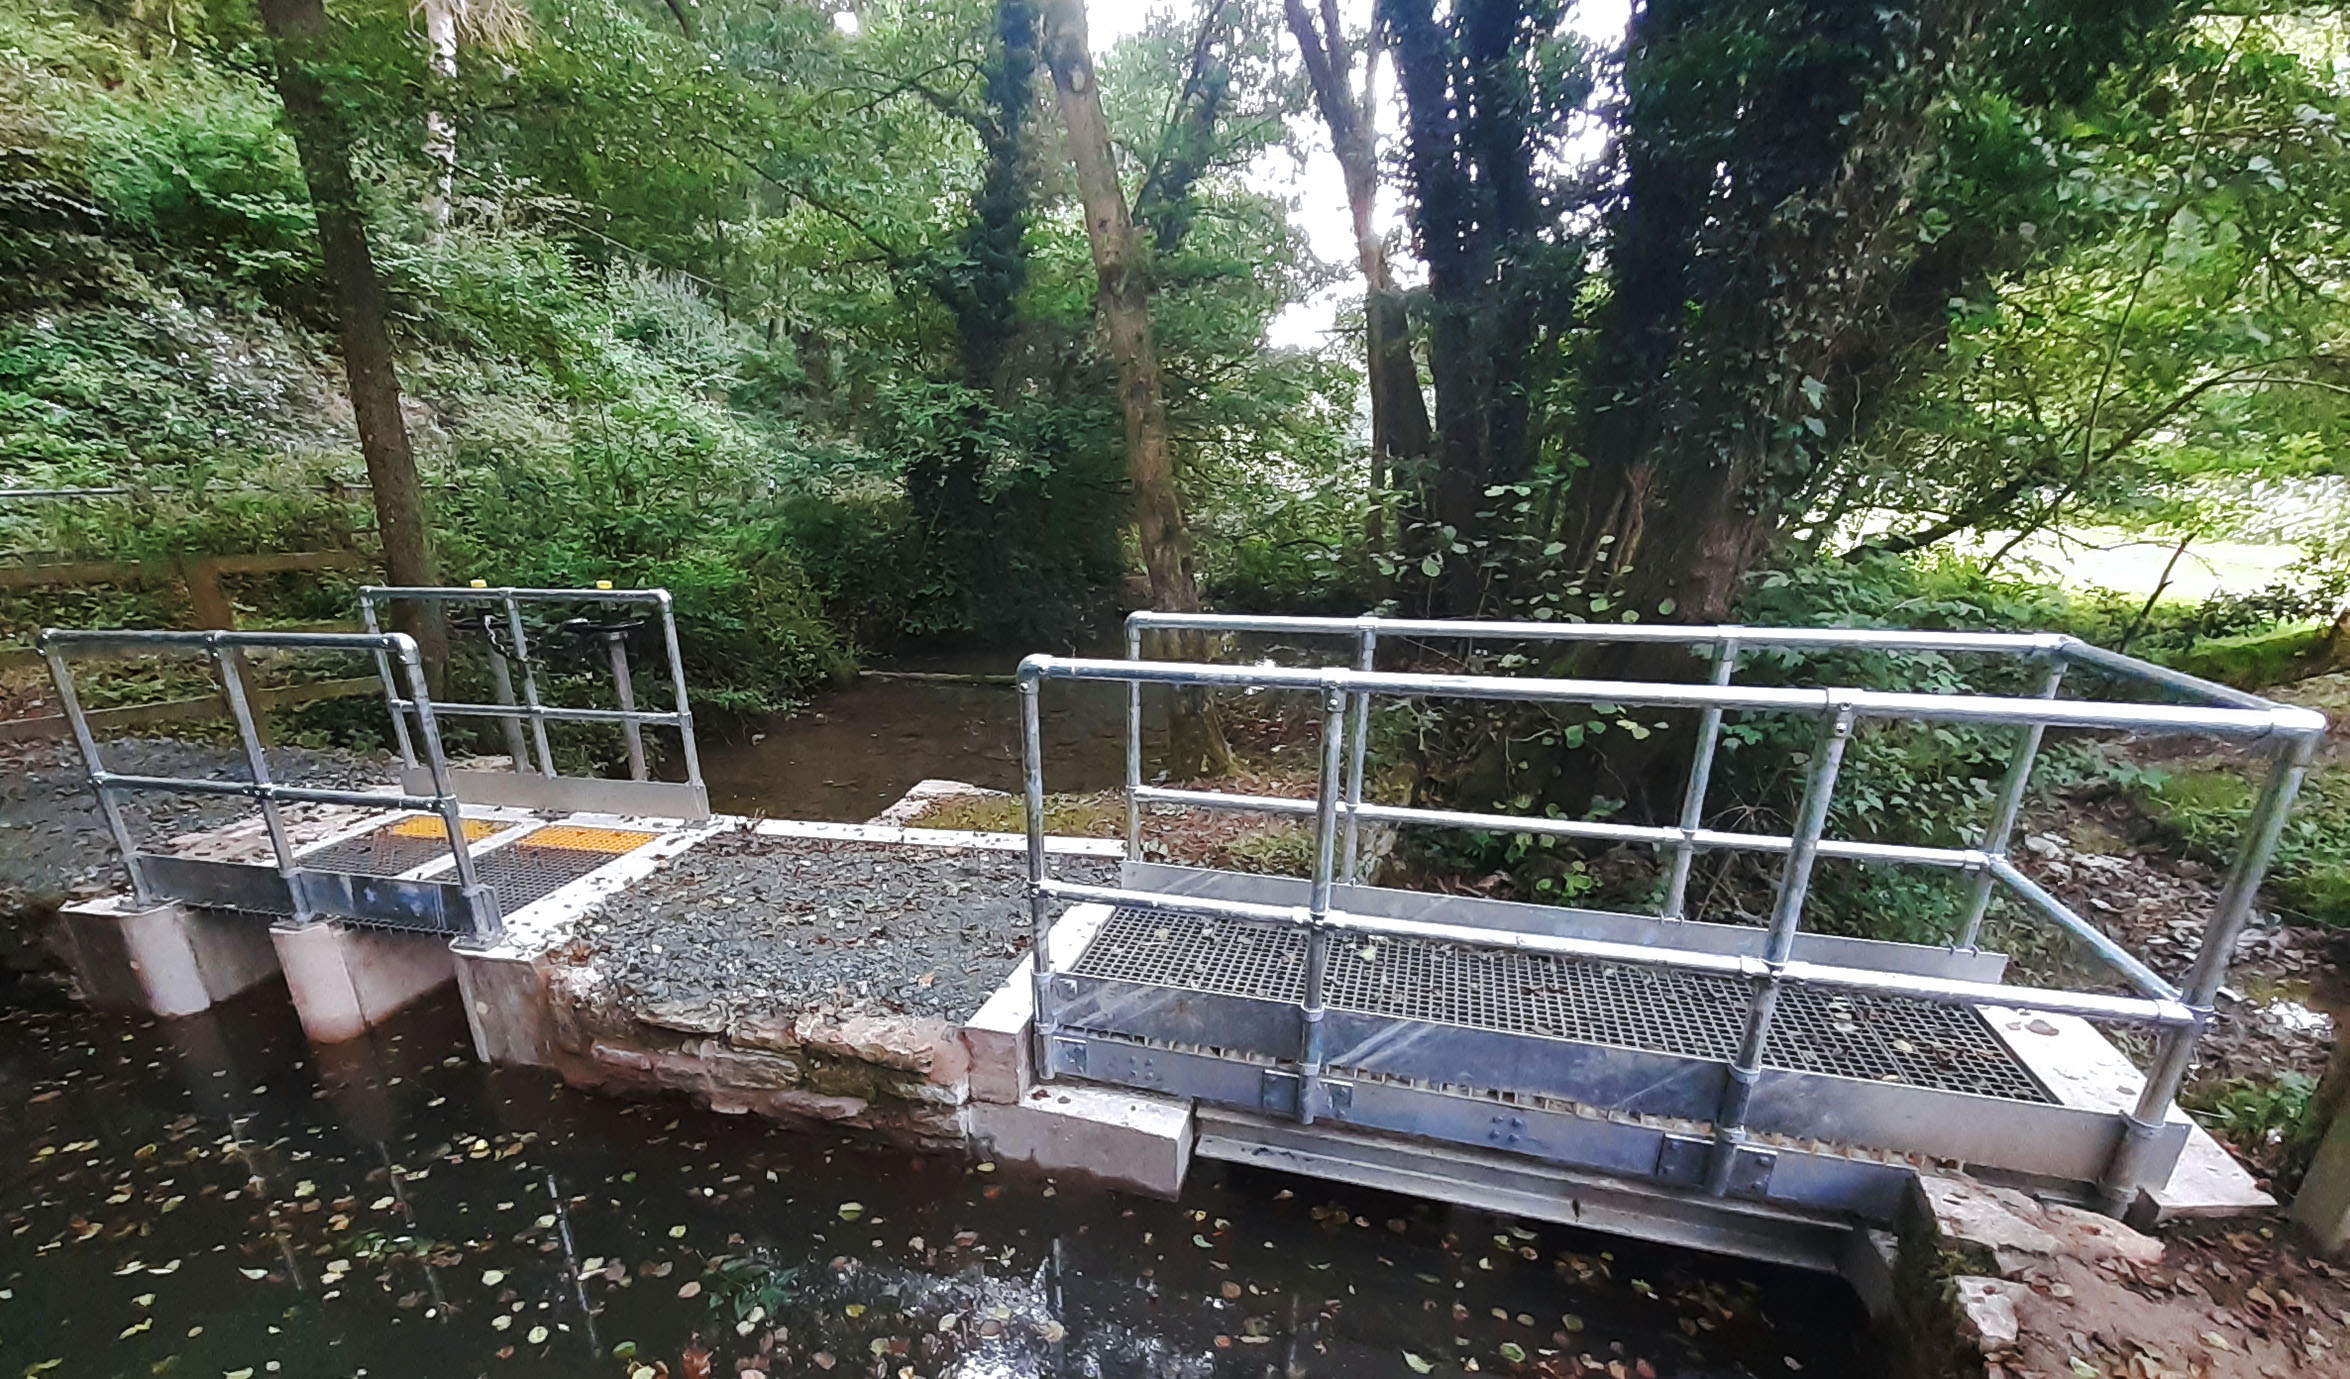 ECS installs penstock system to support environment and migrating fish